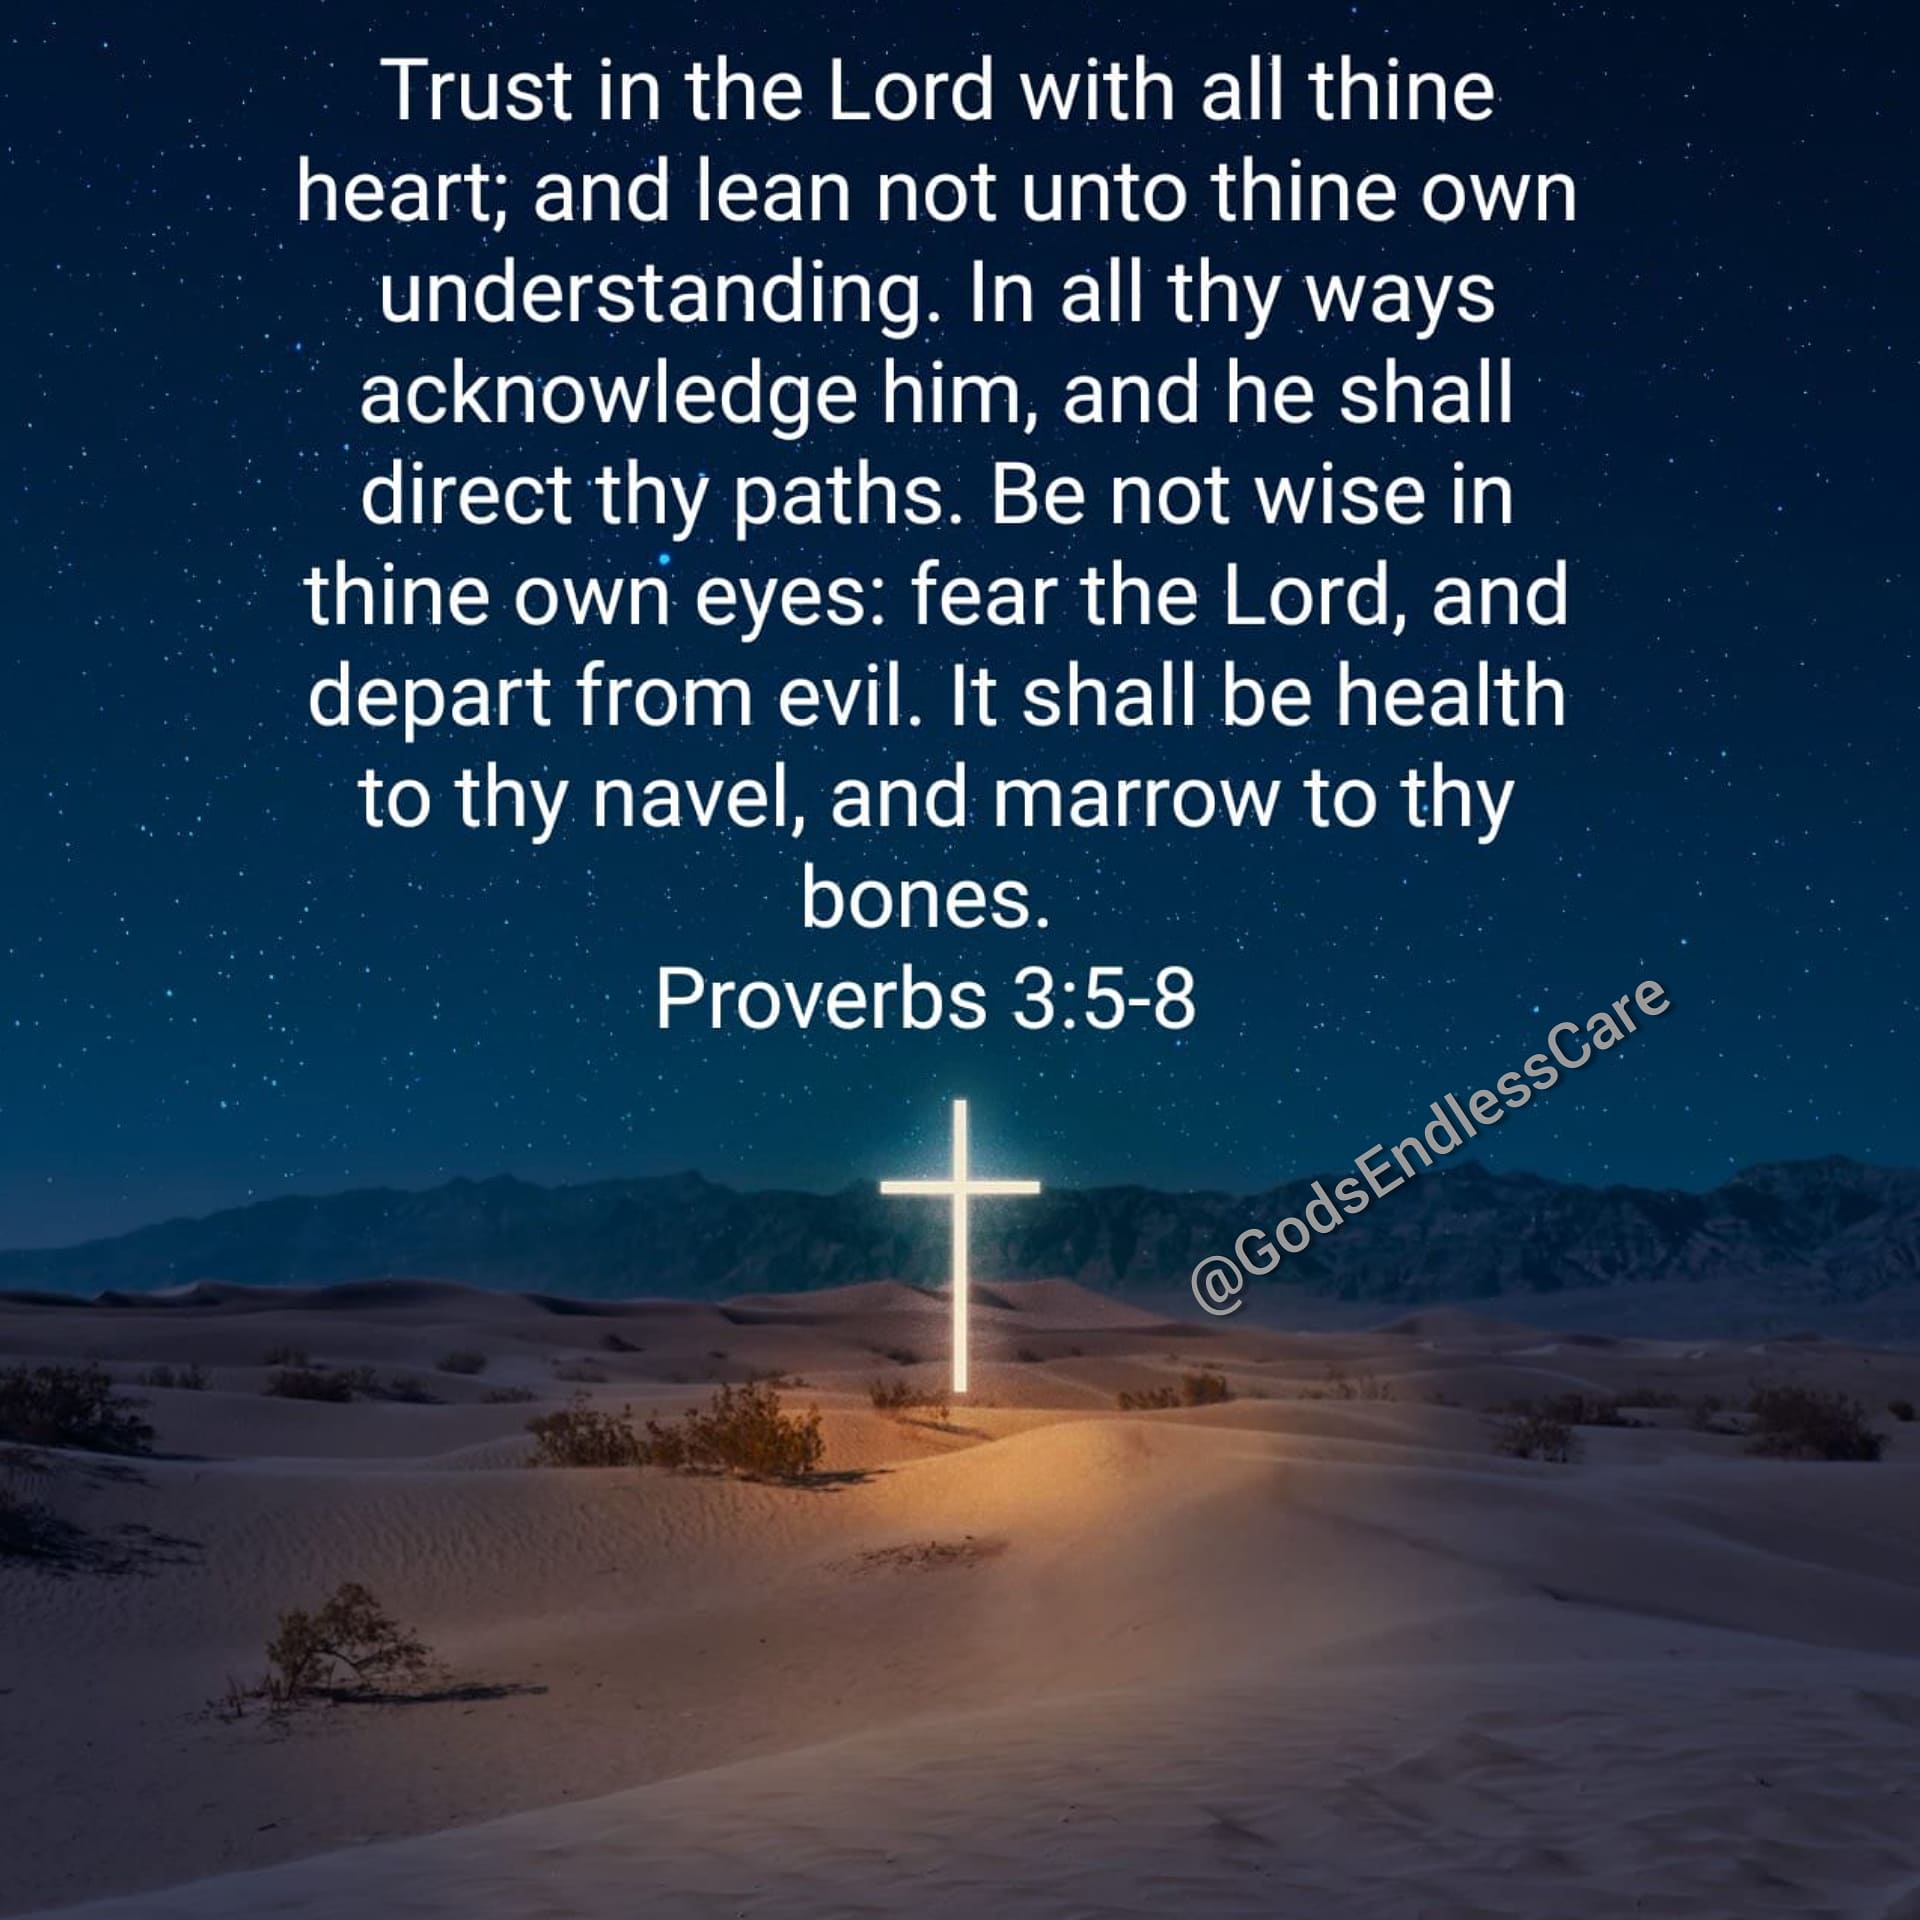 Trust in the Lord with all thine heart; and lean not unto thine own understanding: In all thy ways acknowledge him, and he shall direct thy paths Be not wise in thine own eyes: fear the Lord, and depart from evil: It shall be health to thy navel; and marrow to thy bones: Proverbs 3.5-8 GodsEndlessCare